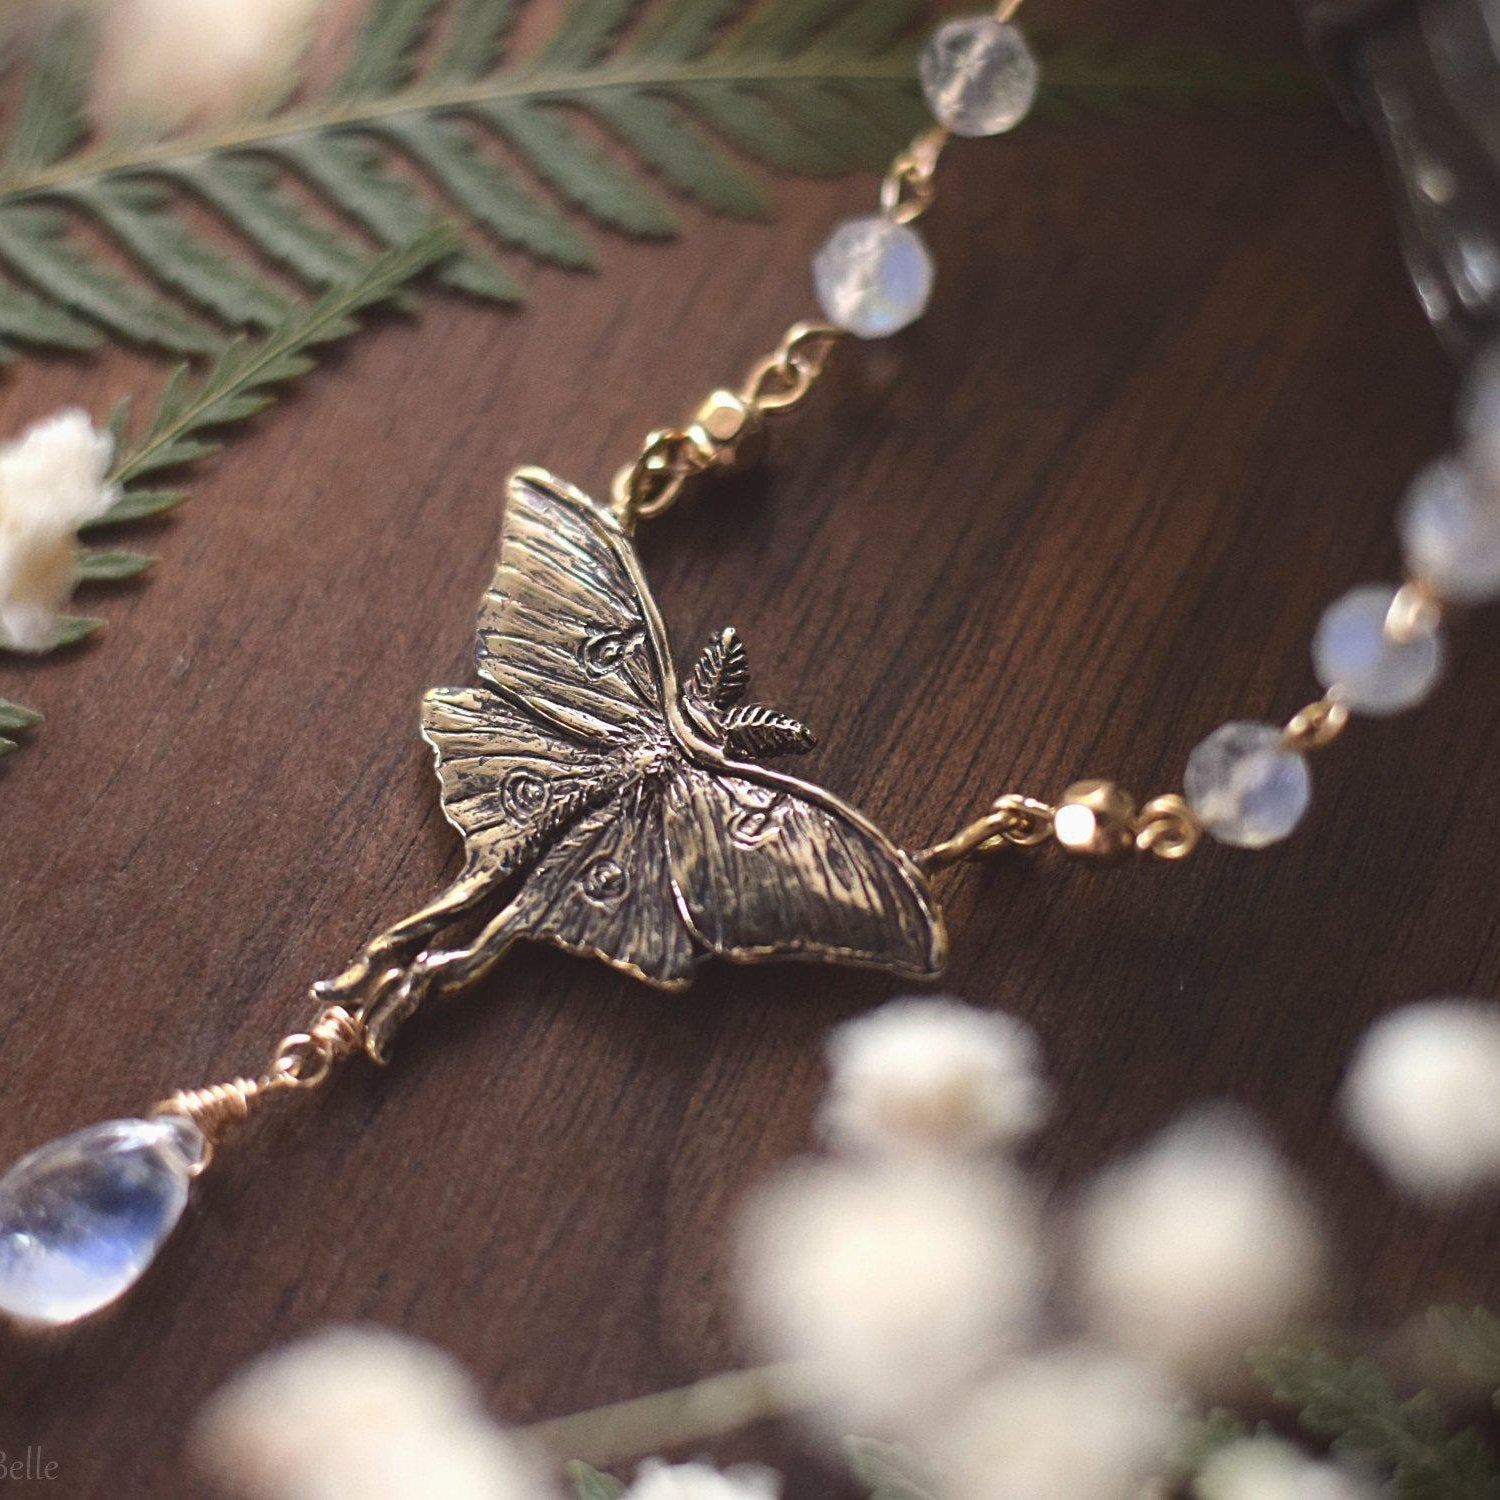 Luna Moth Necklace, Gold Bronze & Rainbow Moonstone Gemstone Beads - Small Luna Moth Pendant - Moth Lover Jewelry Gift by Woodland Belle